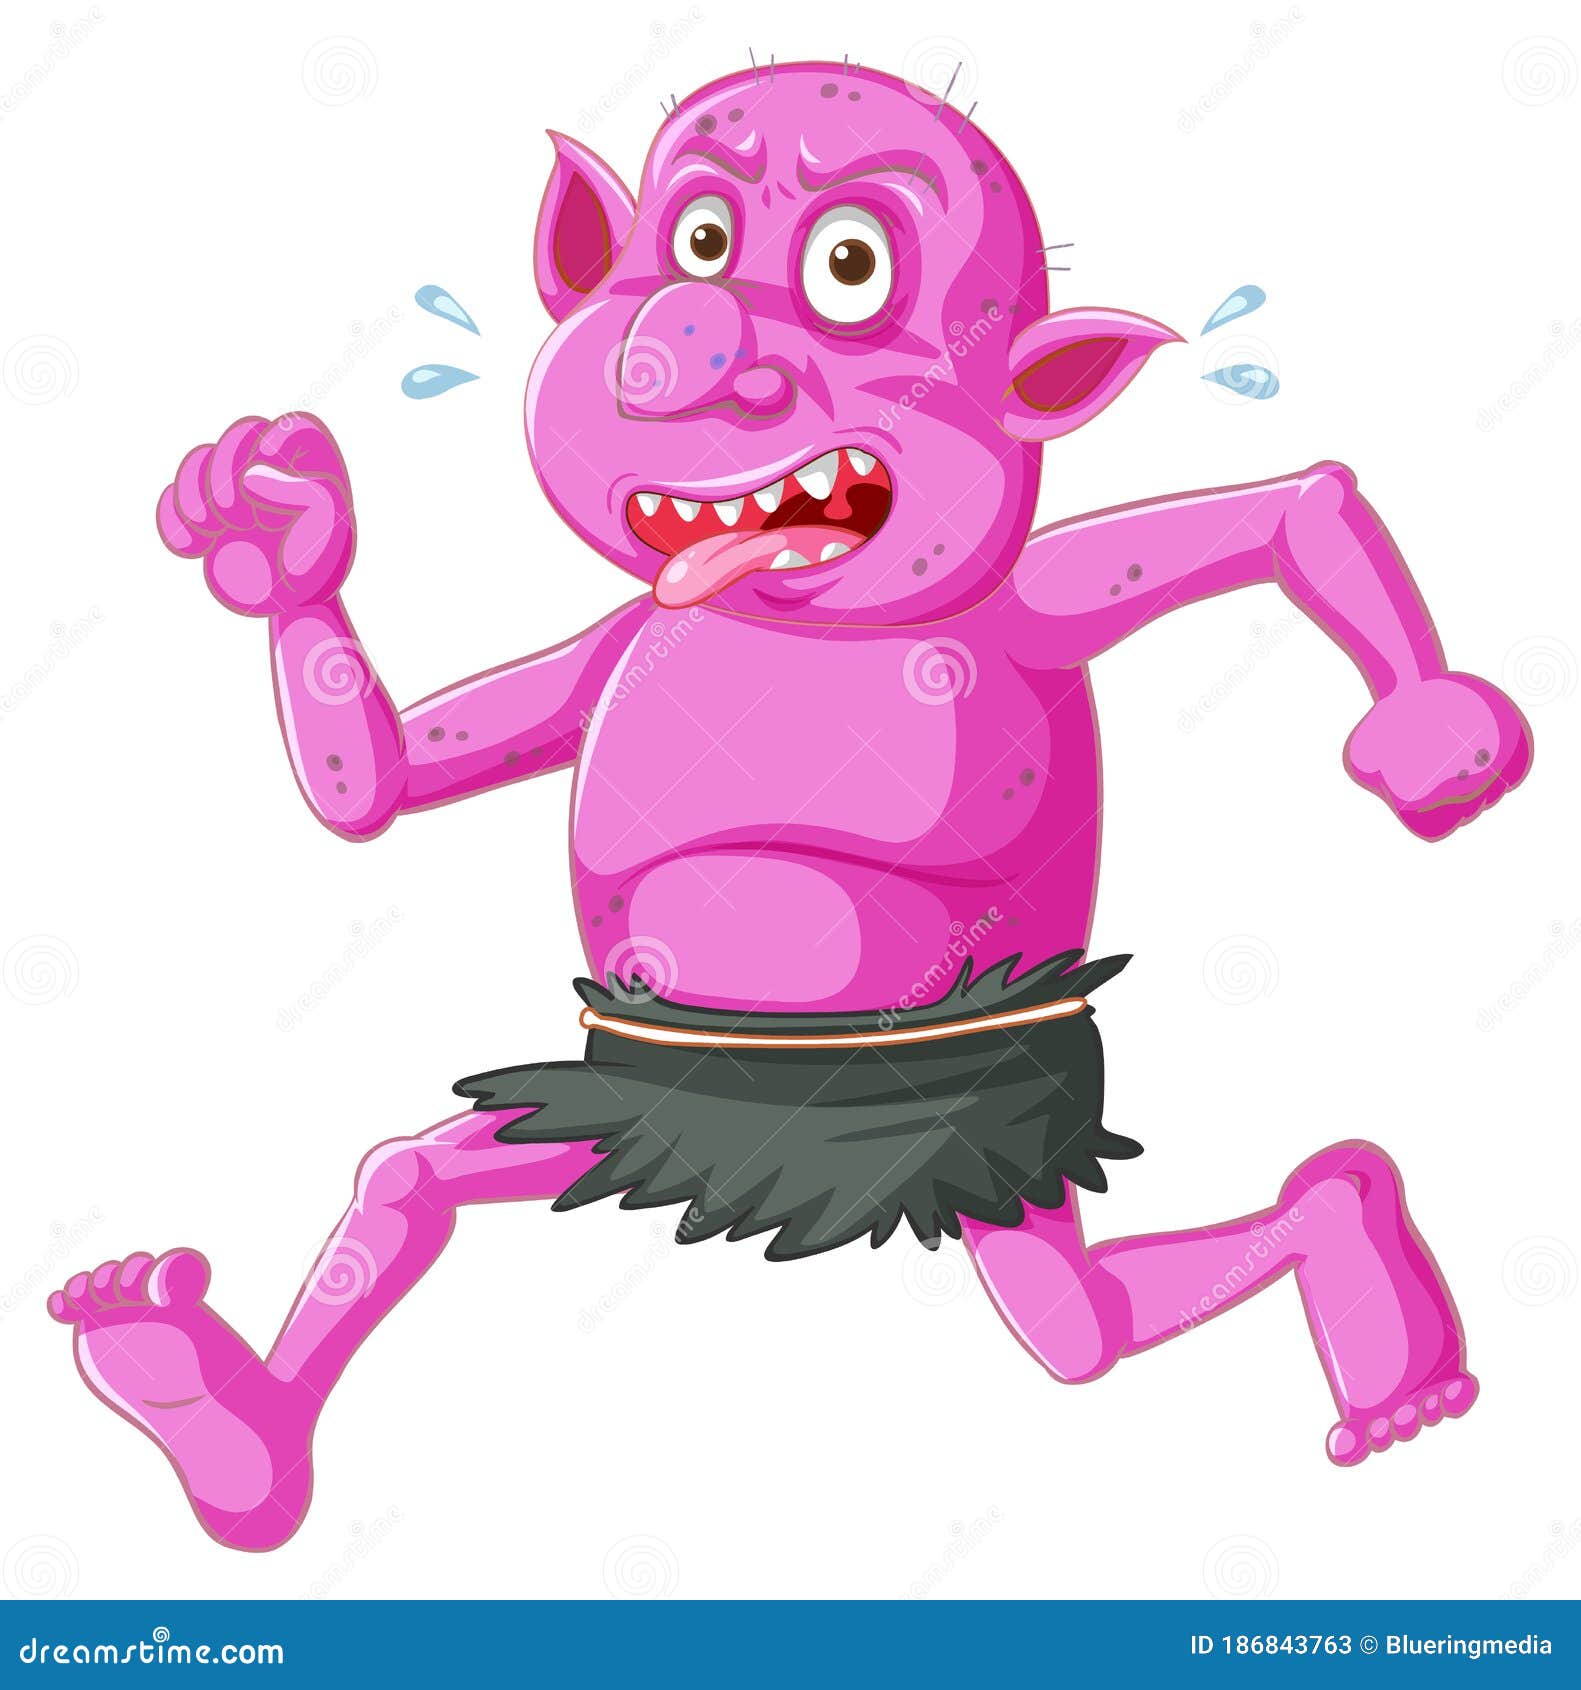 Pink Goblin or Troll Running Pose with Funny Face in Cartoon Character  Isolated Stock Vector - Illustration of face, movement: 186843763